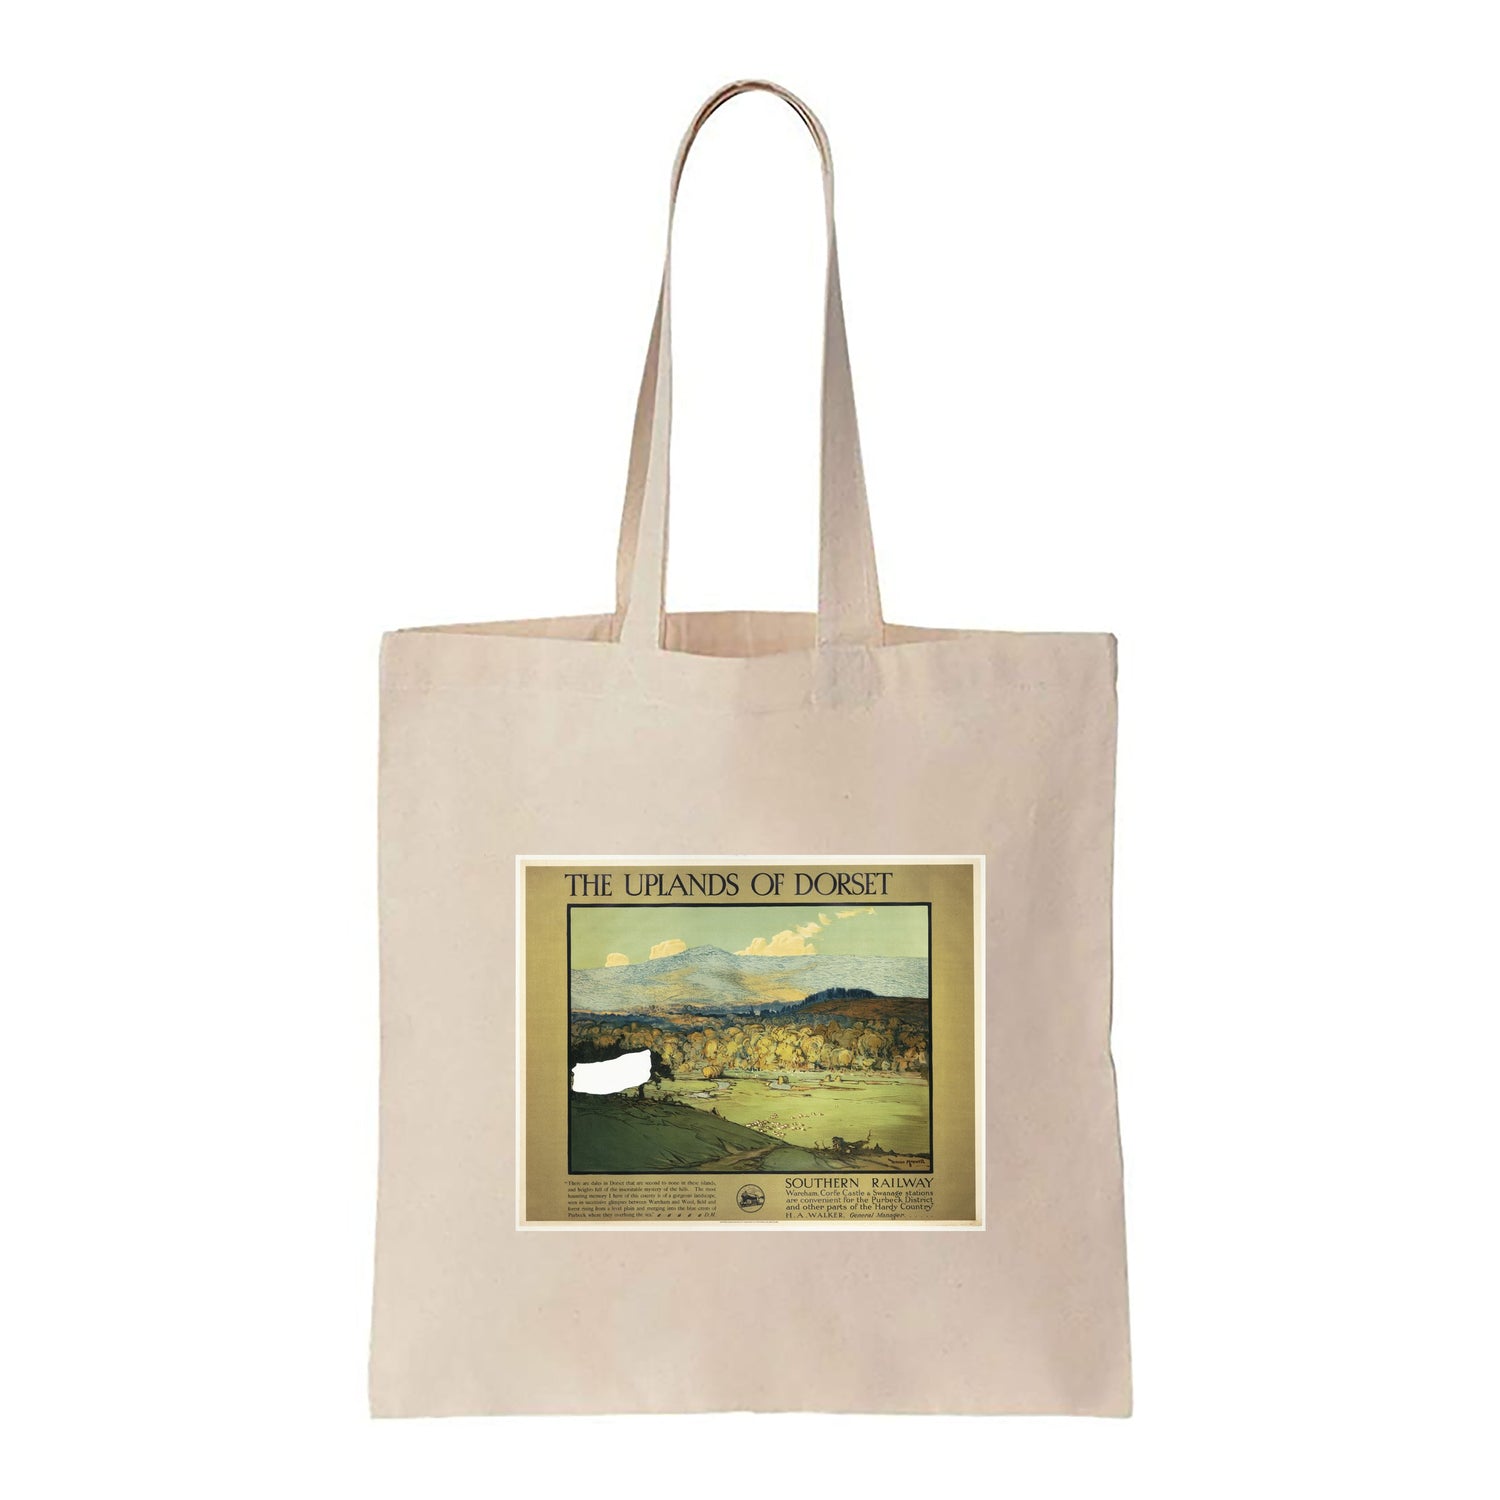 The Uplands Of Dorset, Southern Railway - Canvas Tote Bag